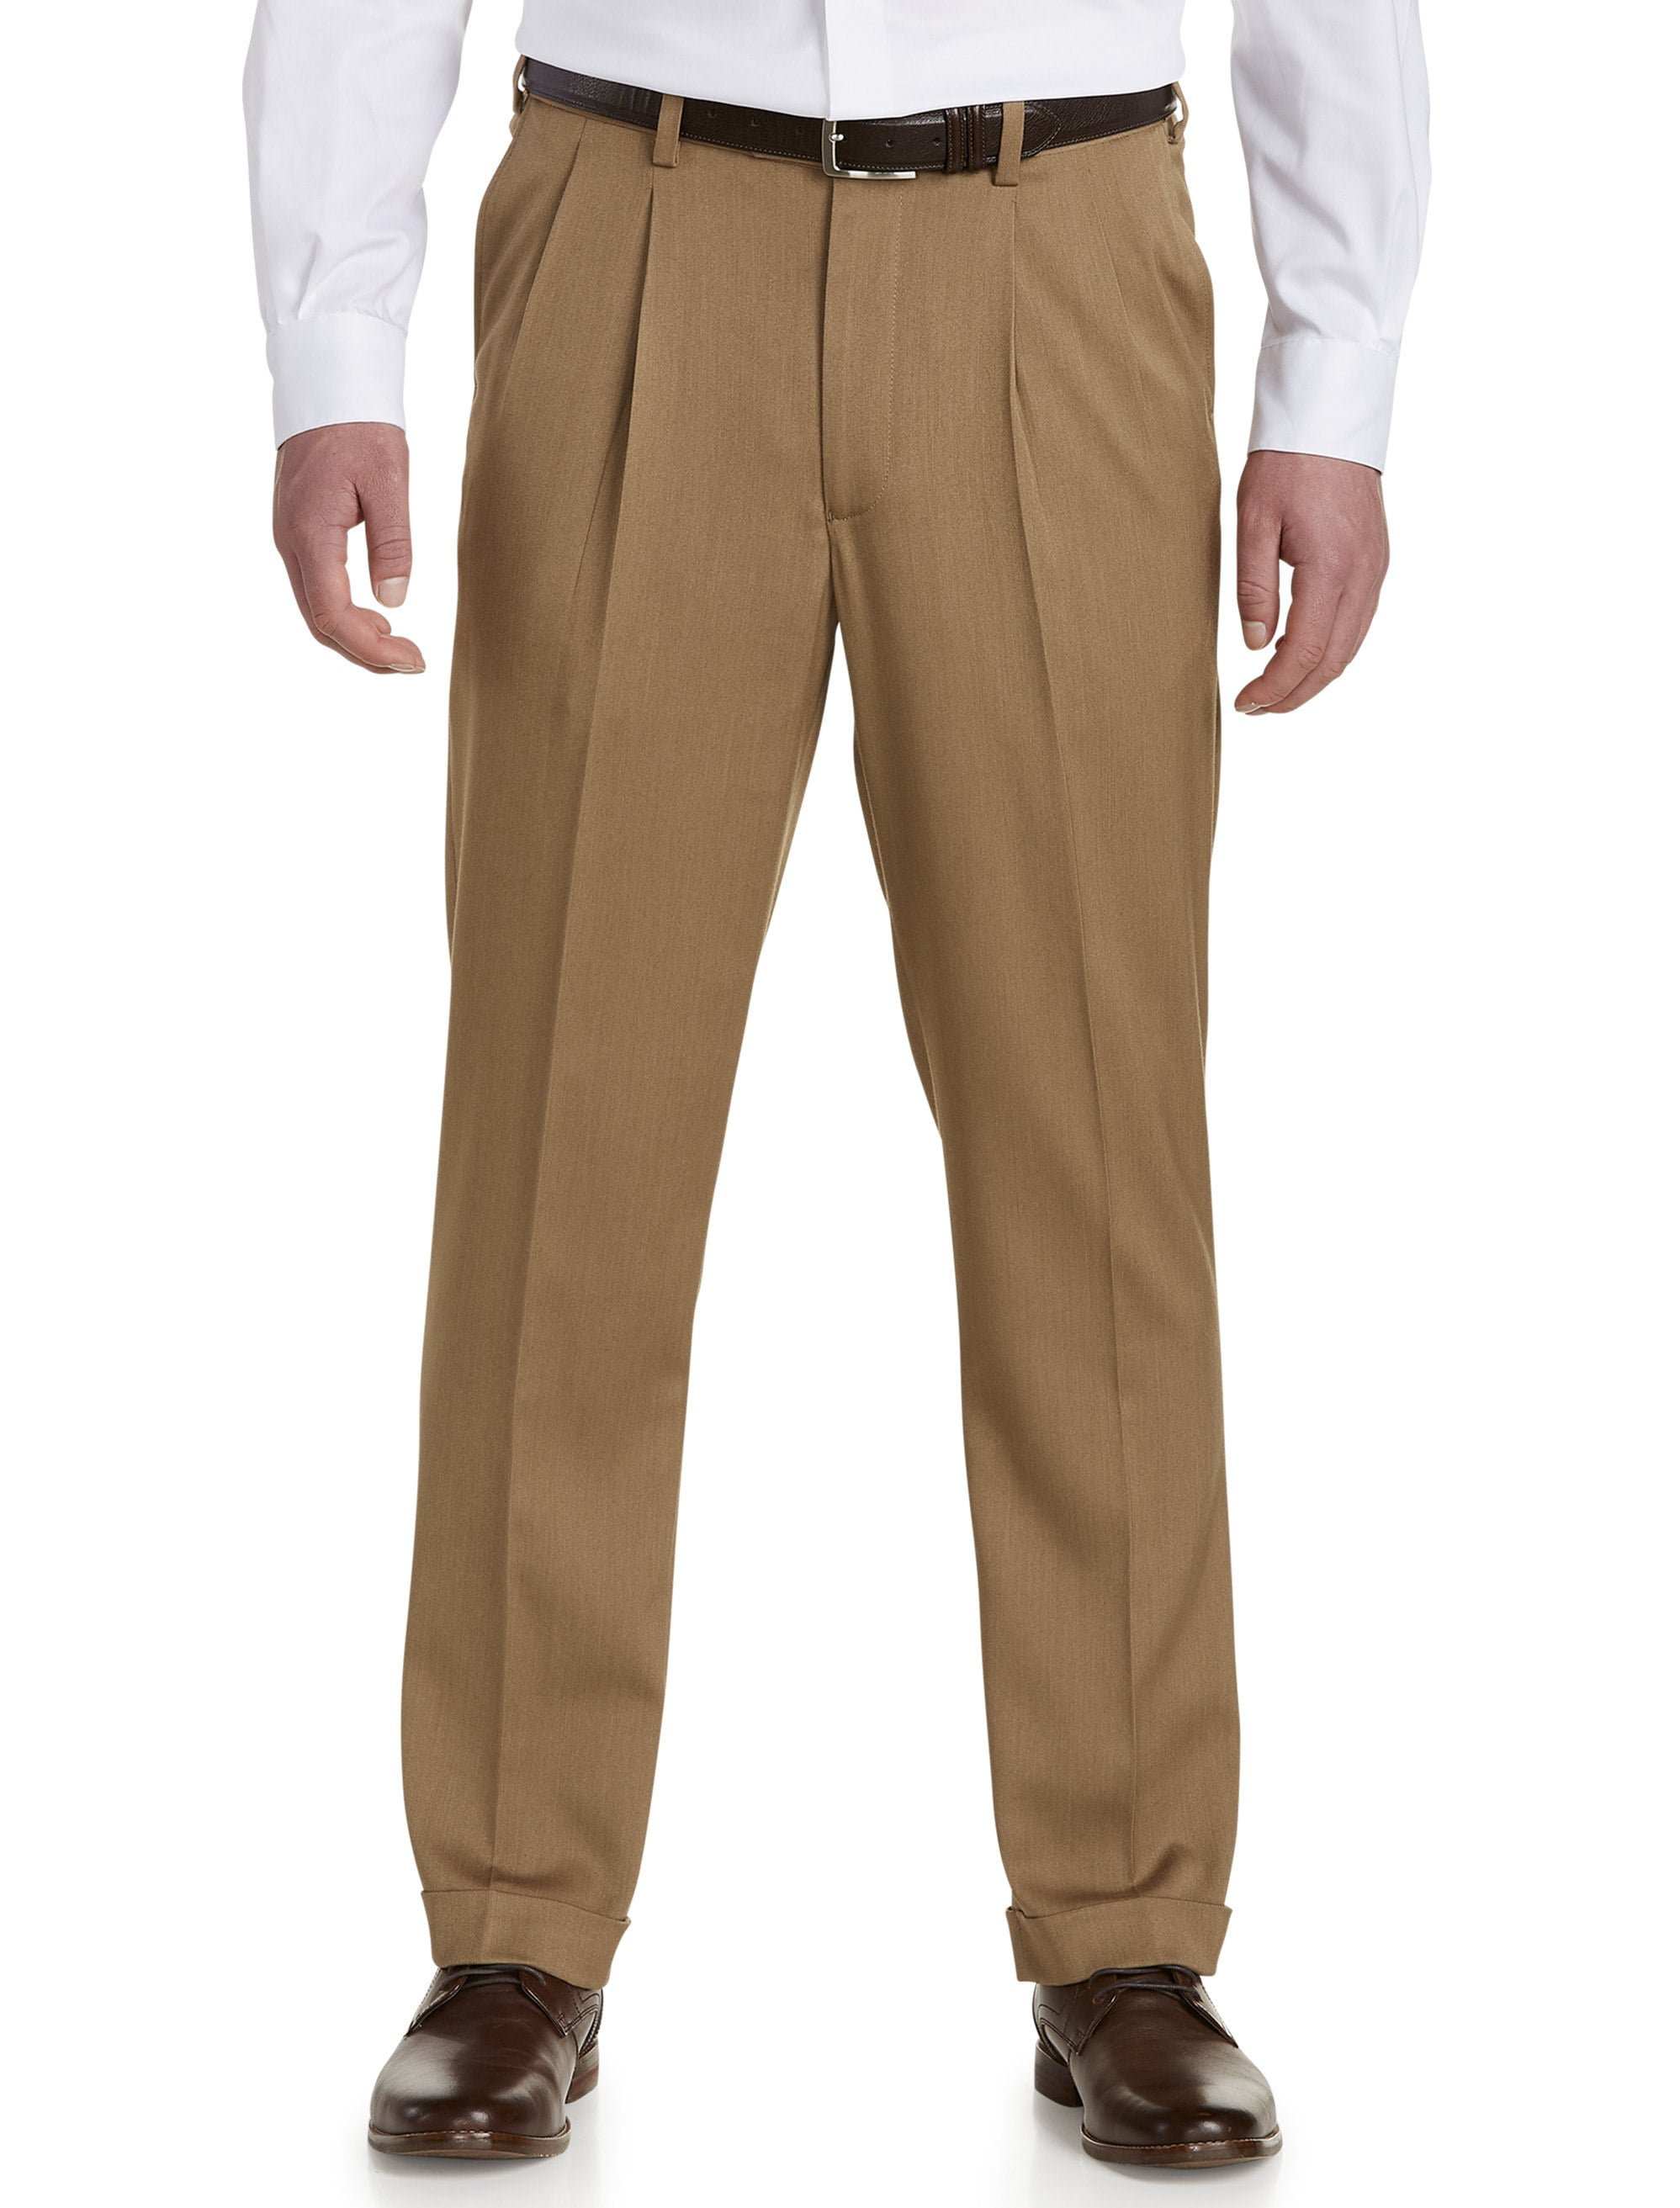 Gold Series by DXL Big and Tall Waist-Relaxer Luster Sateen Hemmed Flat-Front Suit Pants 